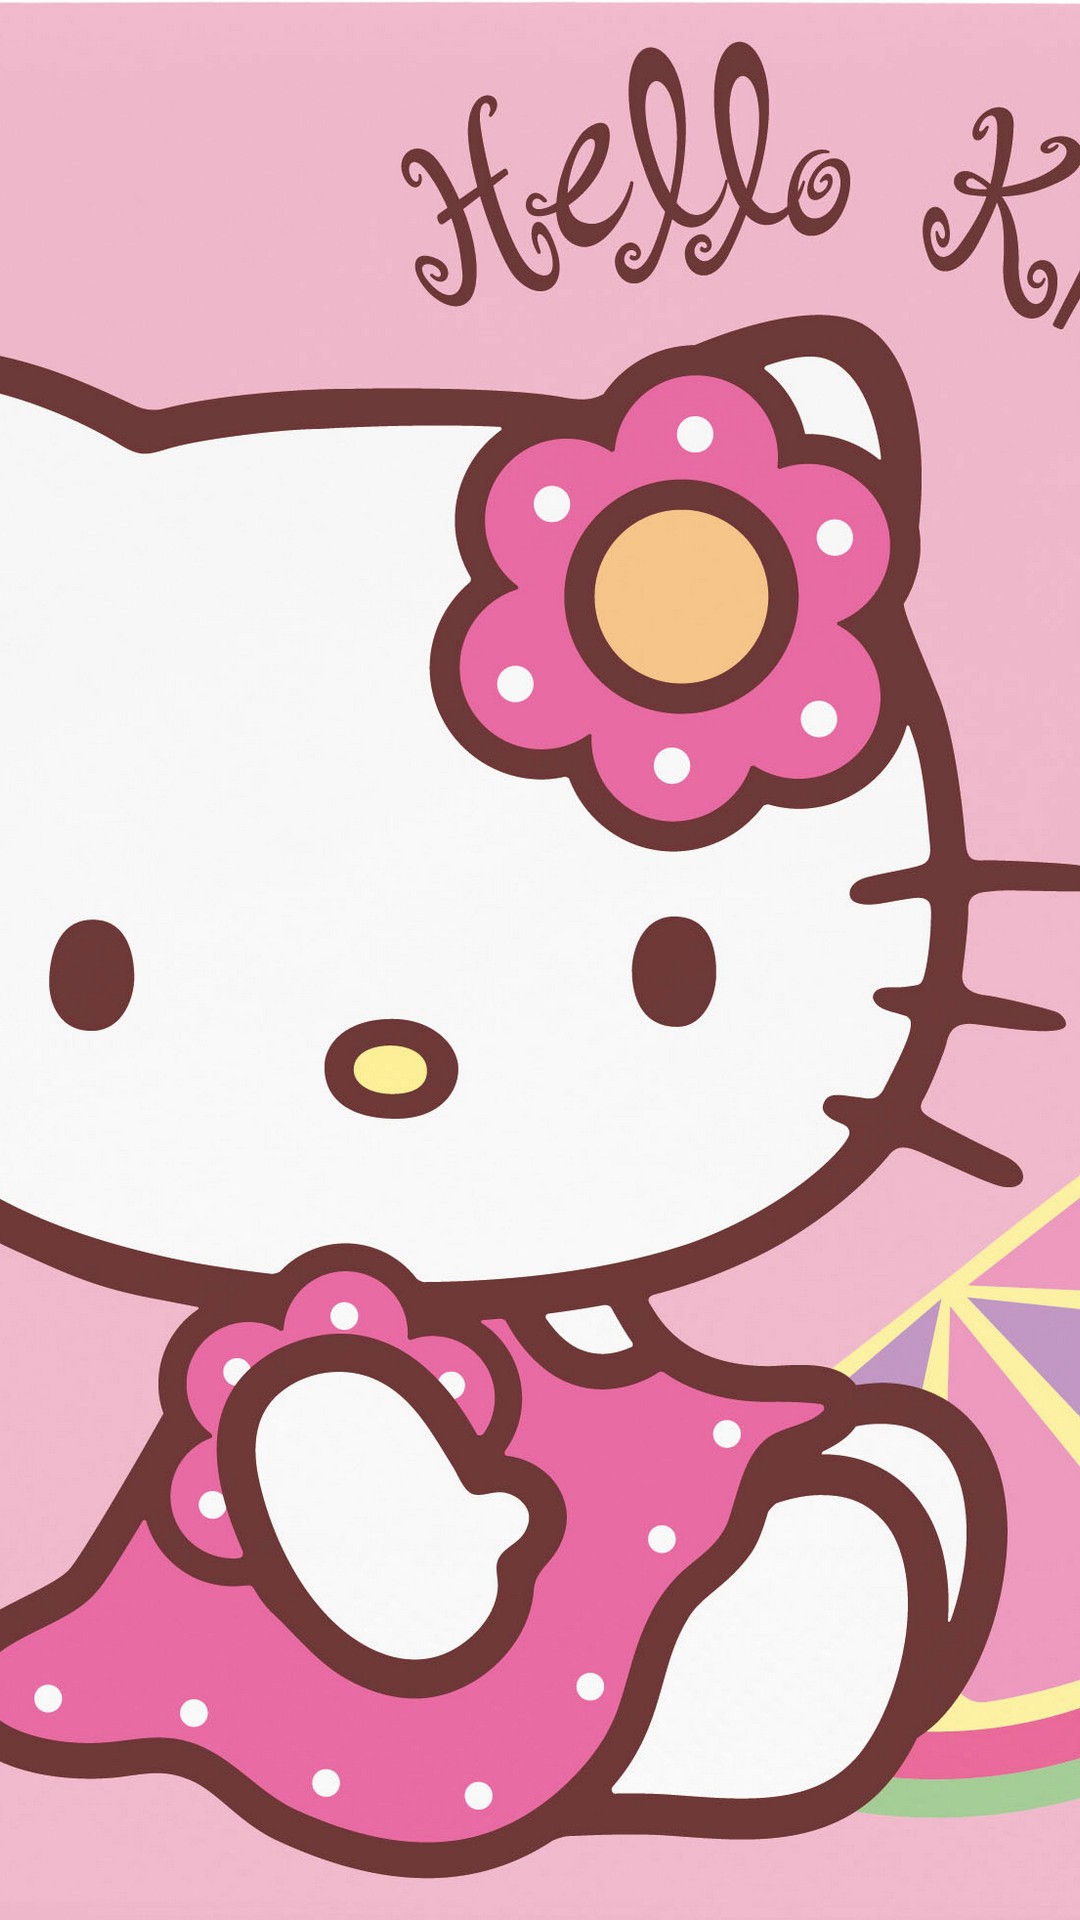 Sanrio Hello Kitty Android Wallpaper with image resolution 1080x1920 pixel. You can make this wallpaper for your Android backgrounds, Tablet, Smartphones Screensavers and Mobile Phone Lock Screen